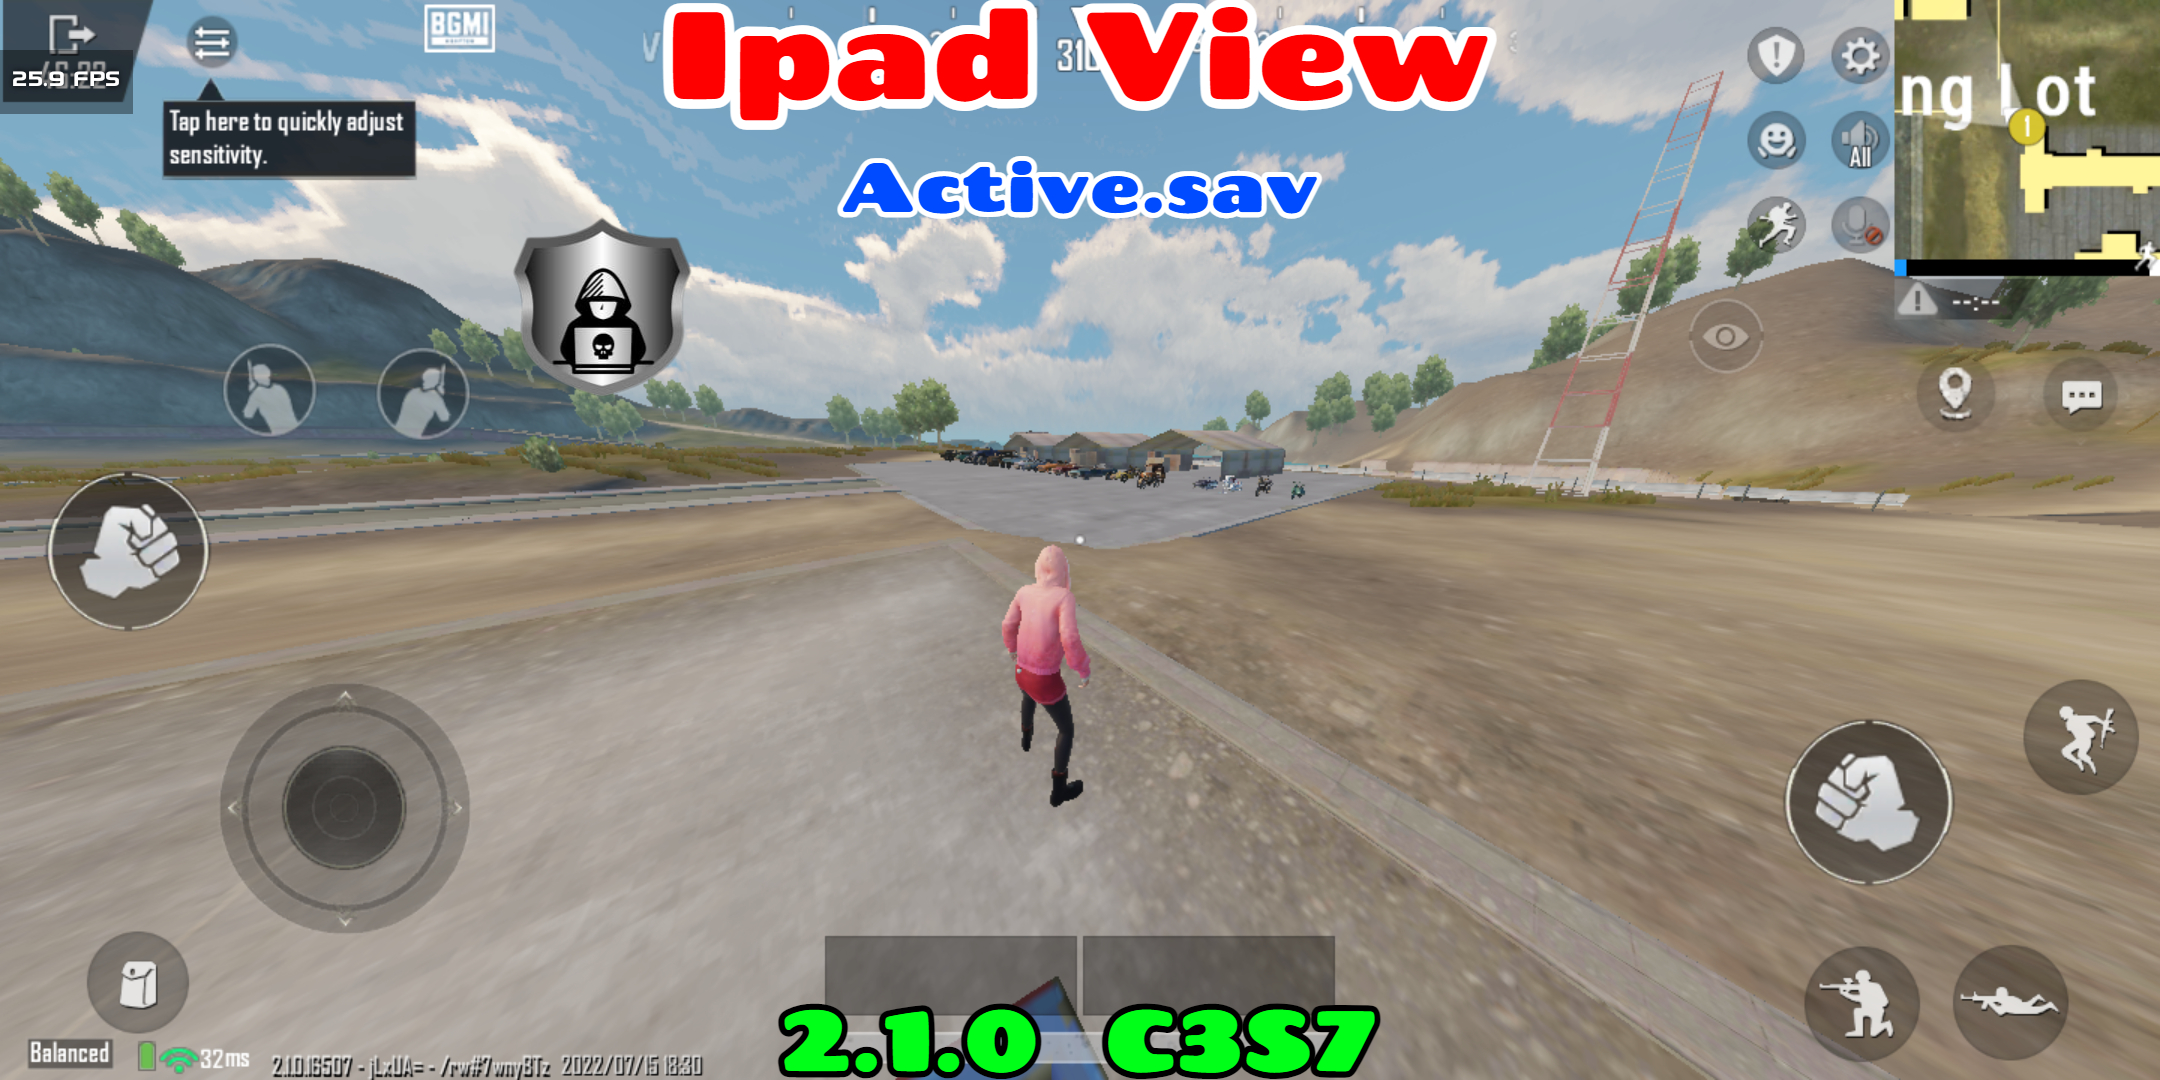 You are currently viewing PUBG 2.1.0 Ipad View Hack File Active.sav Download C3S7